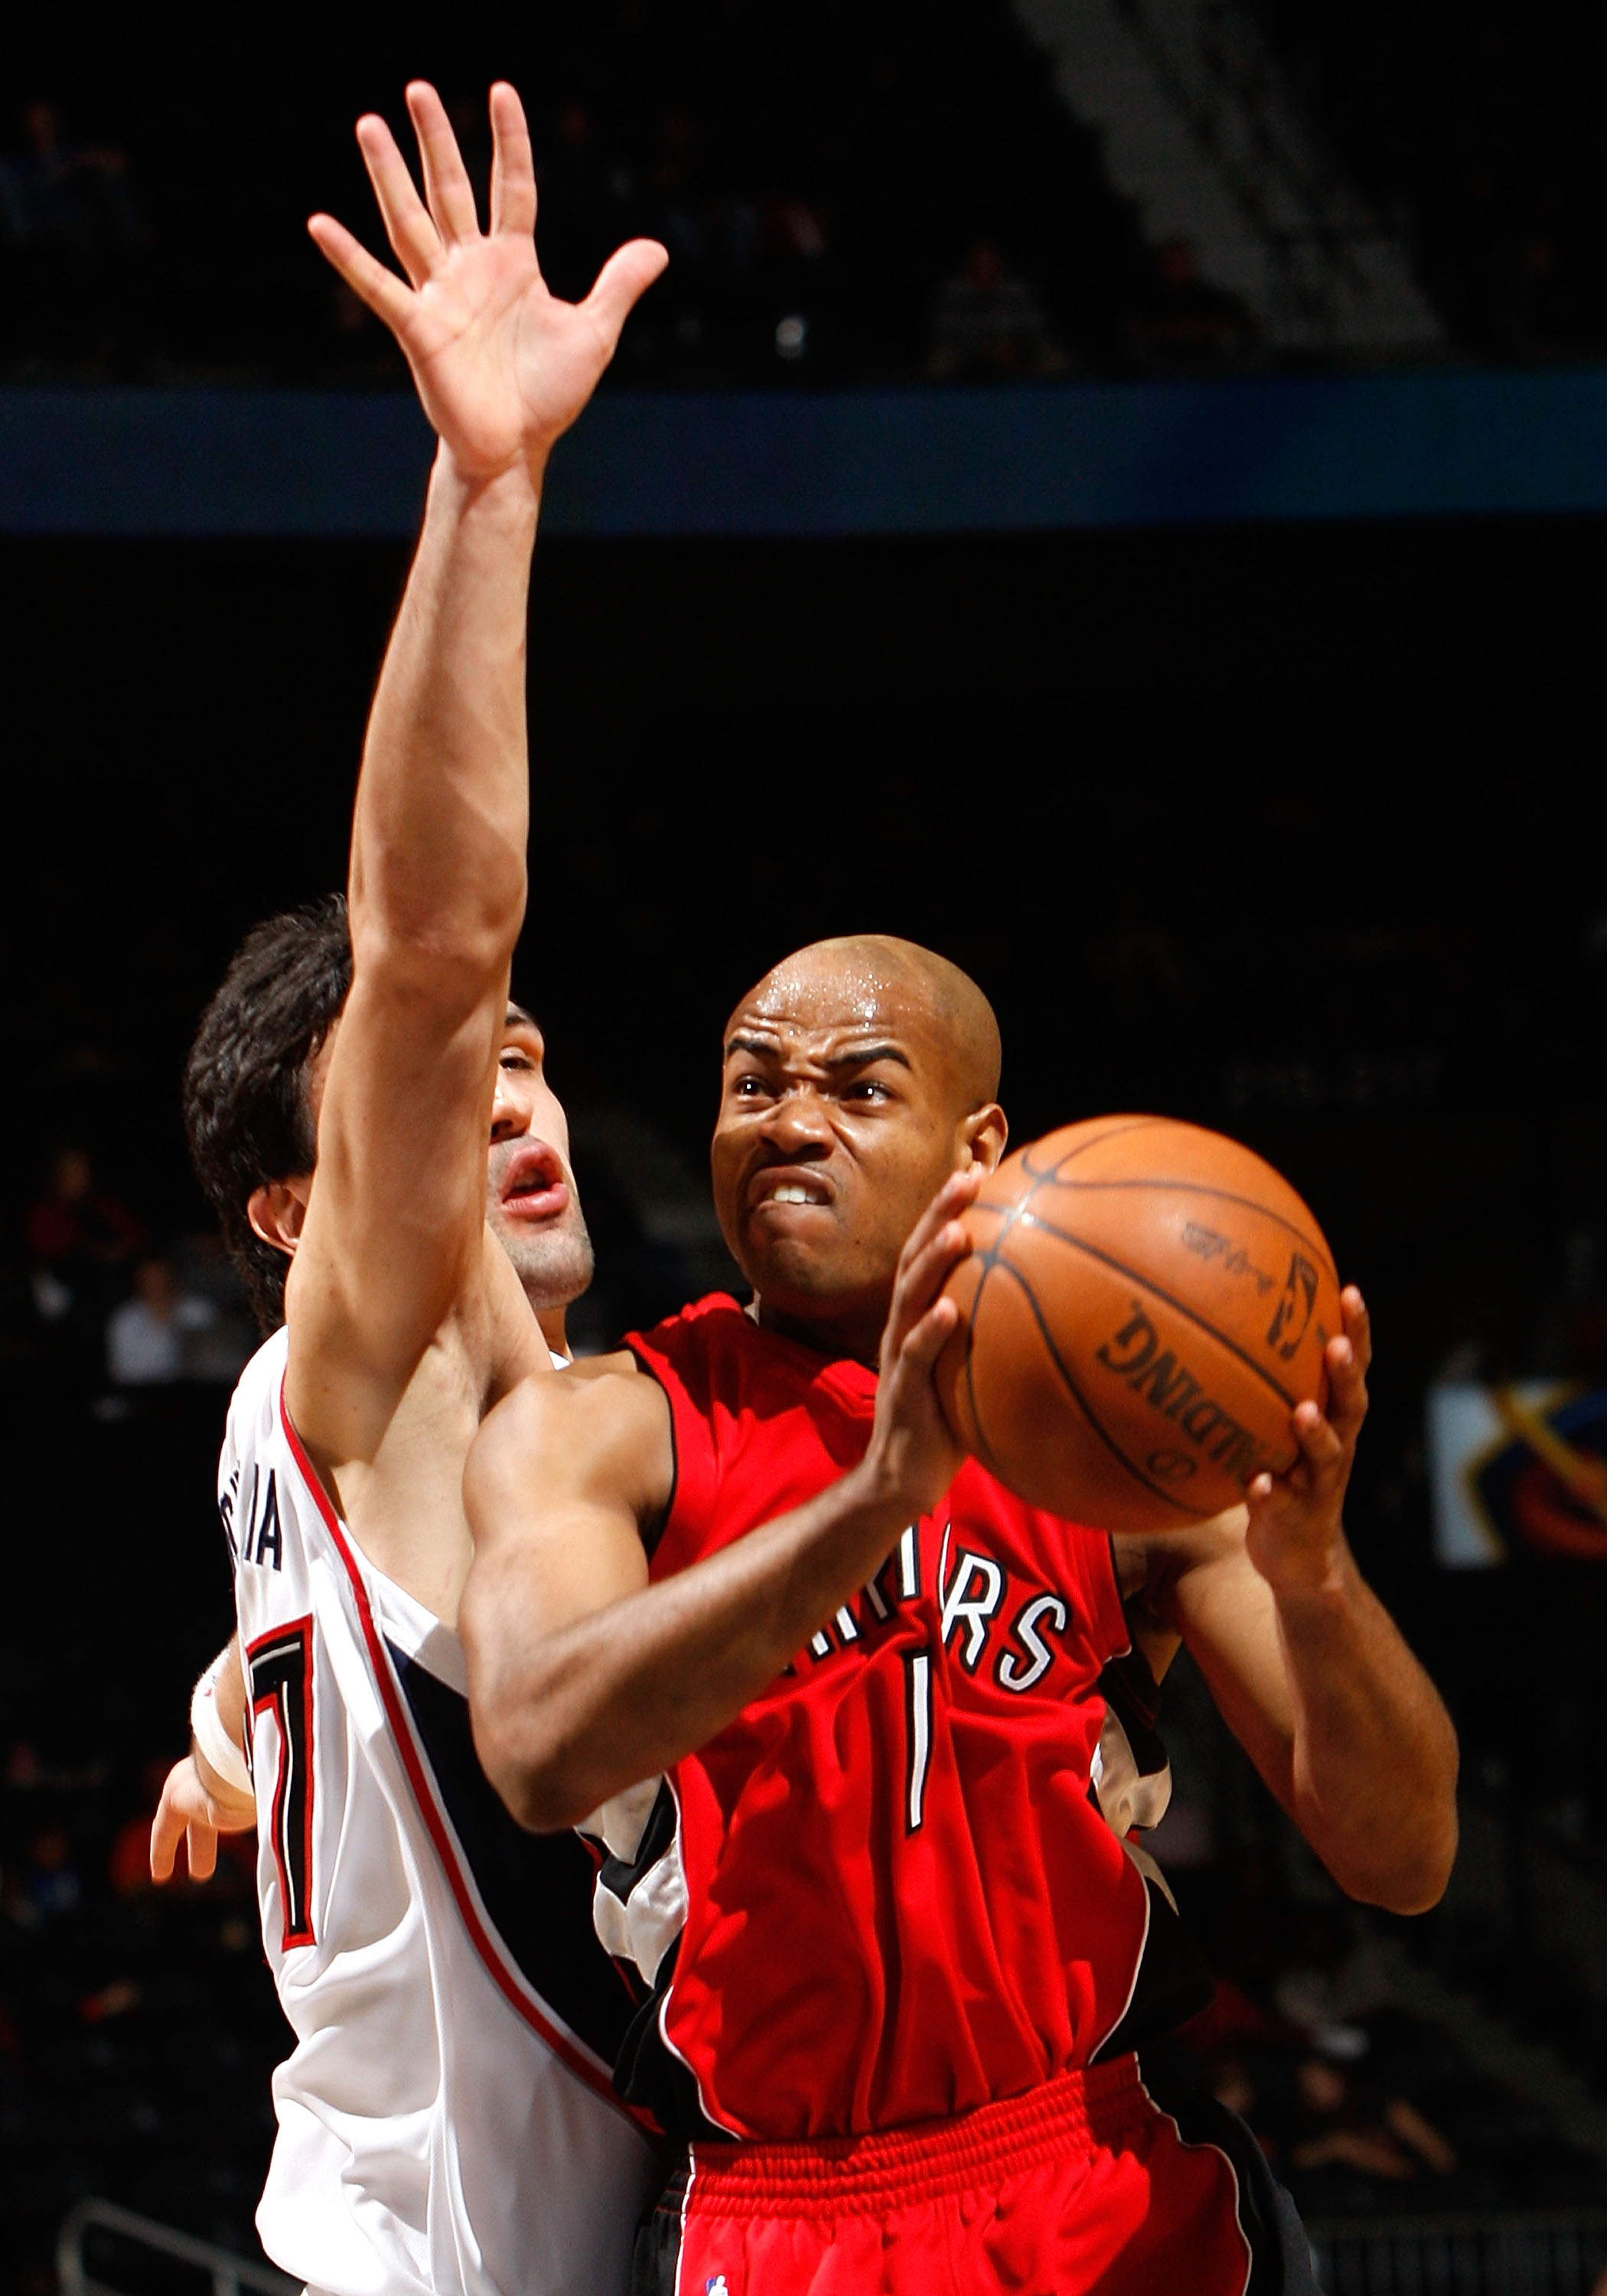 ATLANTA - DECEMBER 02:  Jarrett Jack #1 of the Toronto Raptors drives against Zaza Pachulia #27 of the Atlanta Hawks at Philips Arena on December 2, 2009 in Atlanta, Georgia.  NOTE TO USER: User expressly acknowledges and agrees that, by downloading and/o